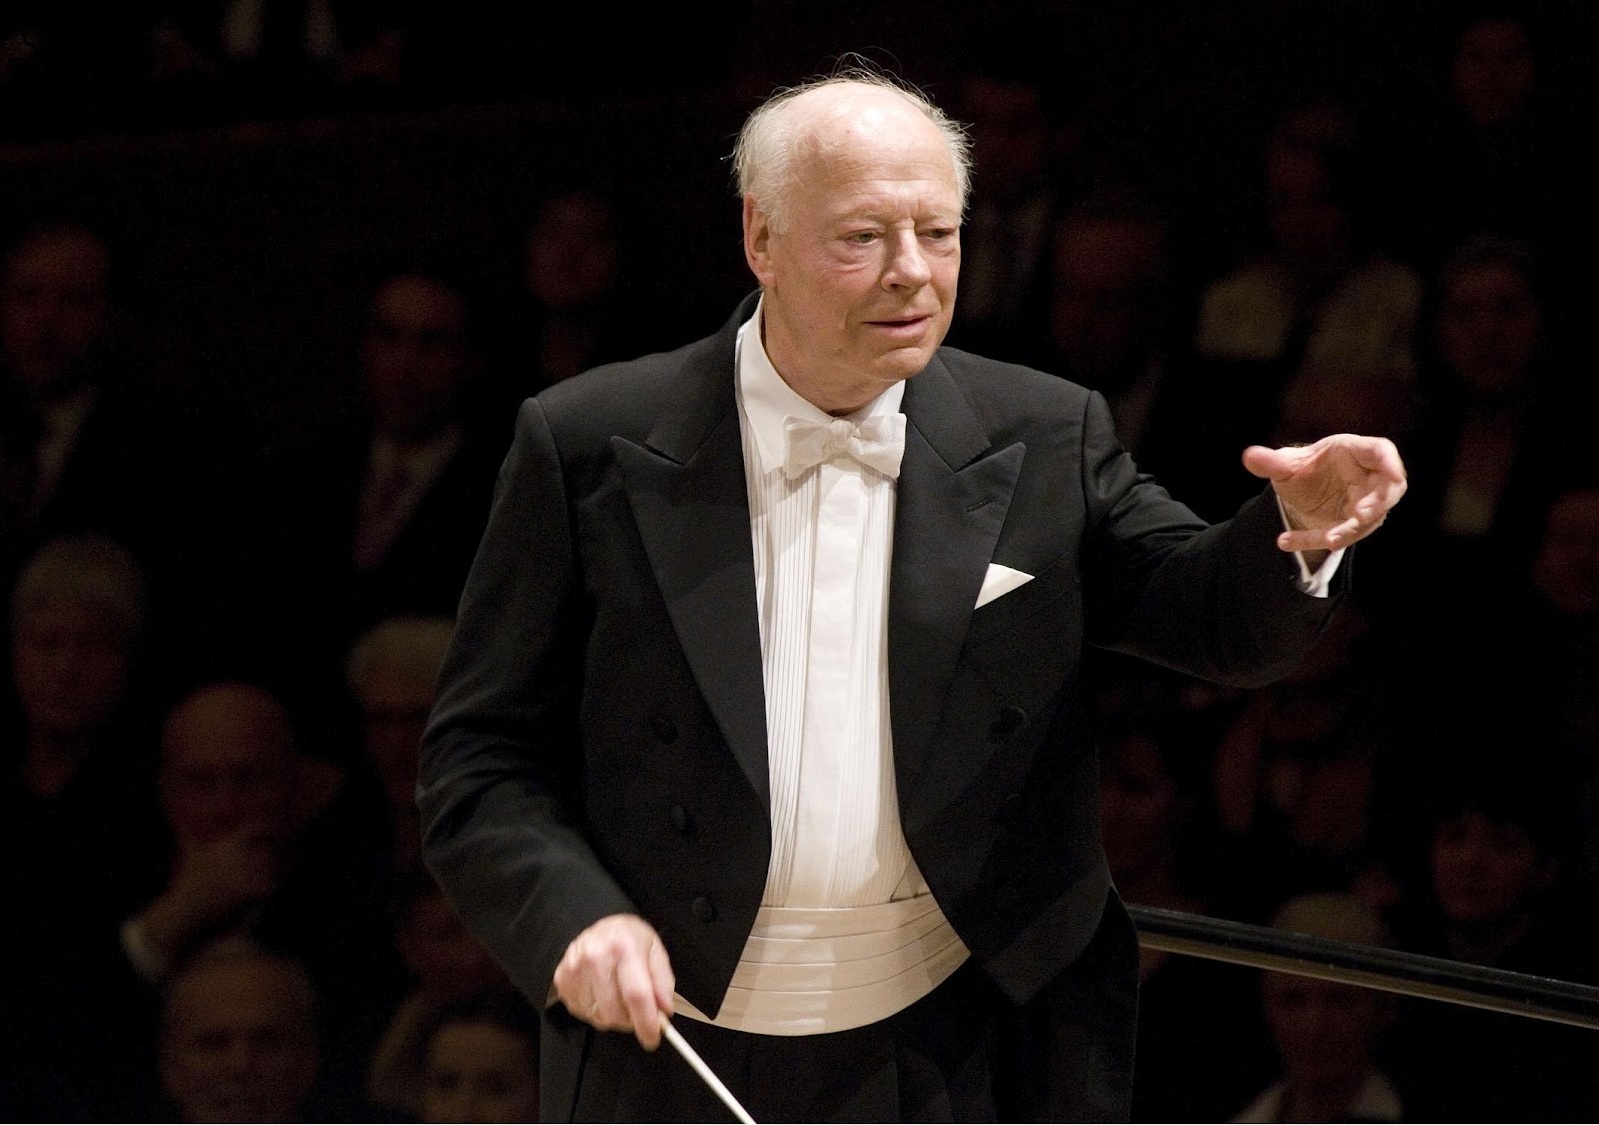 Bernard Haitink conducts the Chamber Orchestra of Europe. Photo: Georg Anderhub/Lucerne Festival